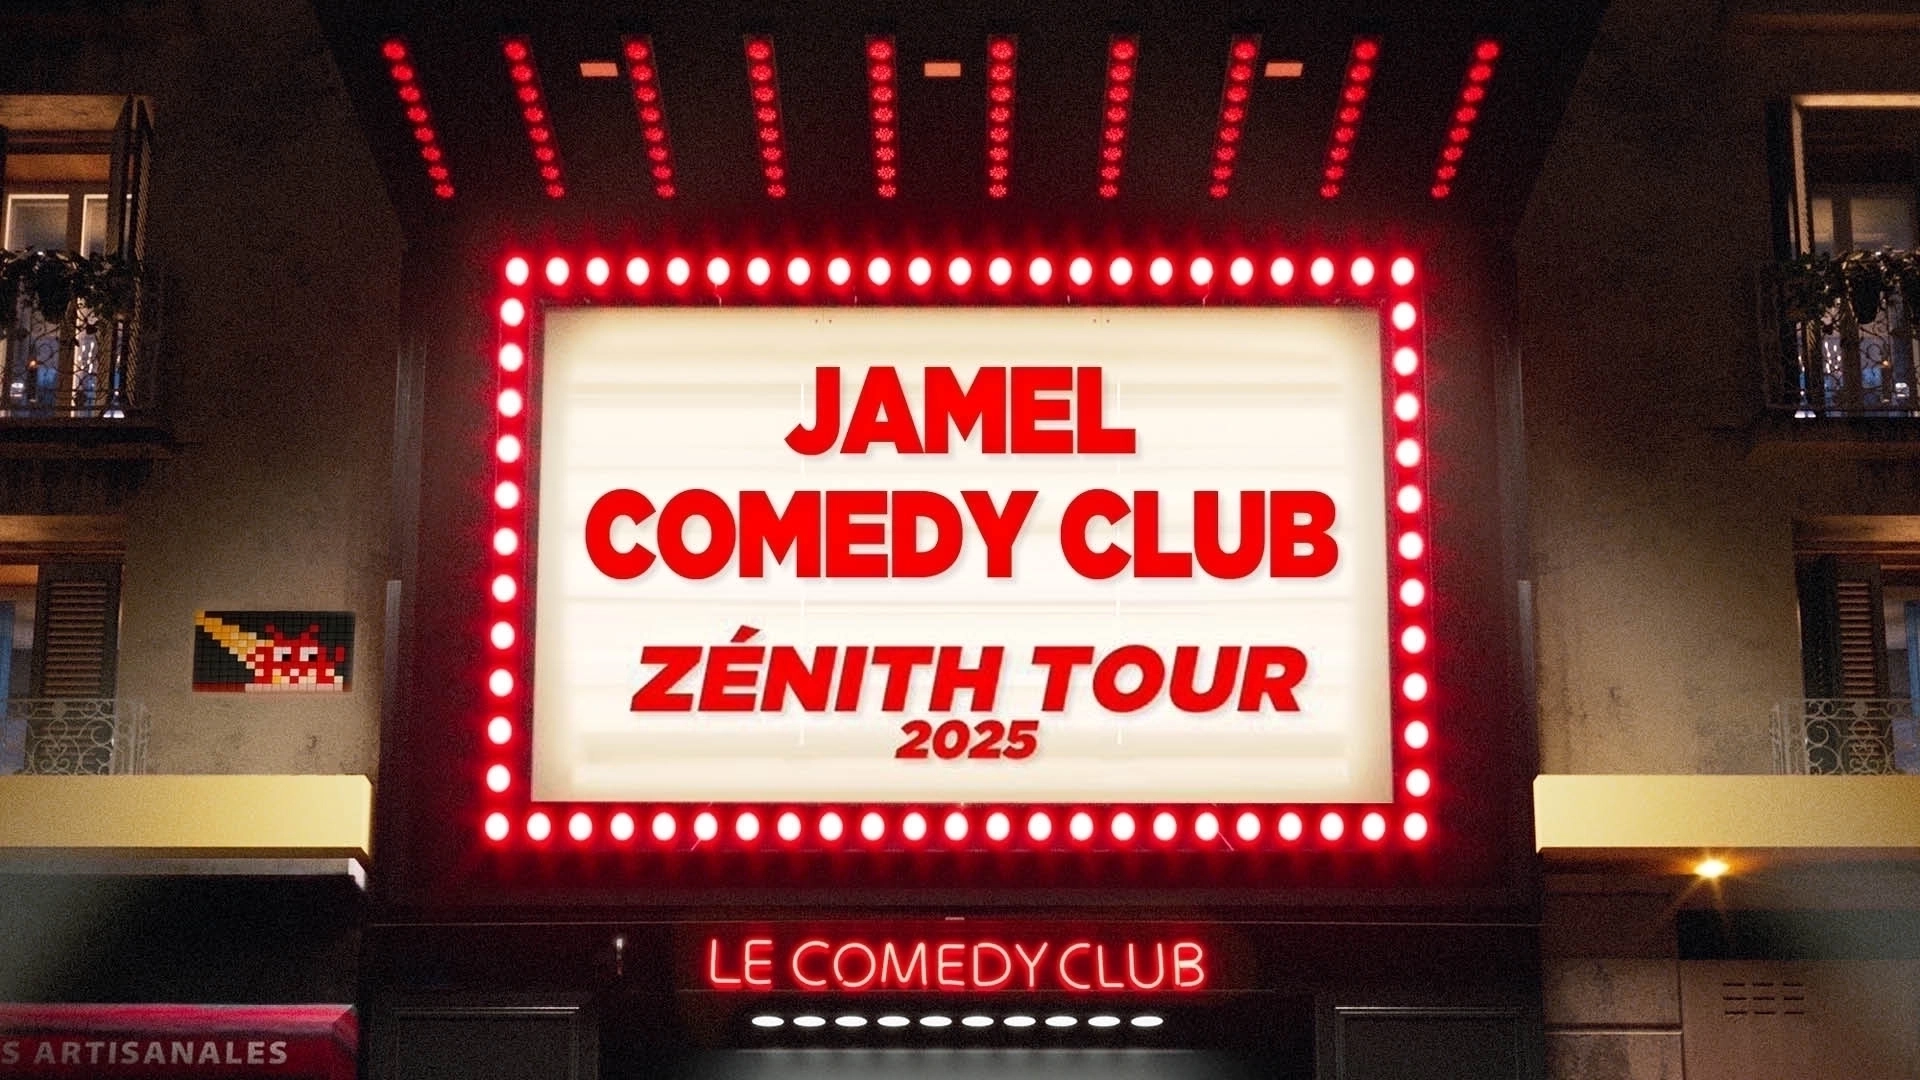 Jamel Comedy Club Zenith Tour 2025 at Le Dome Tickets